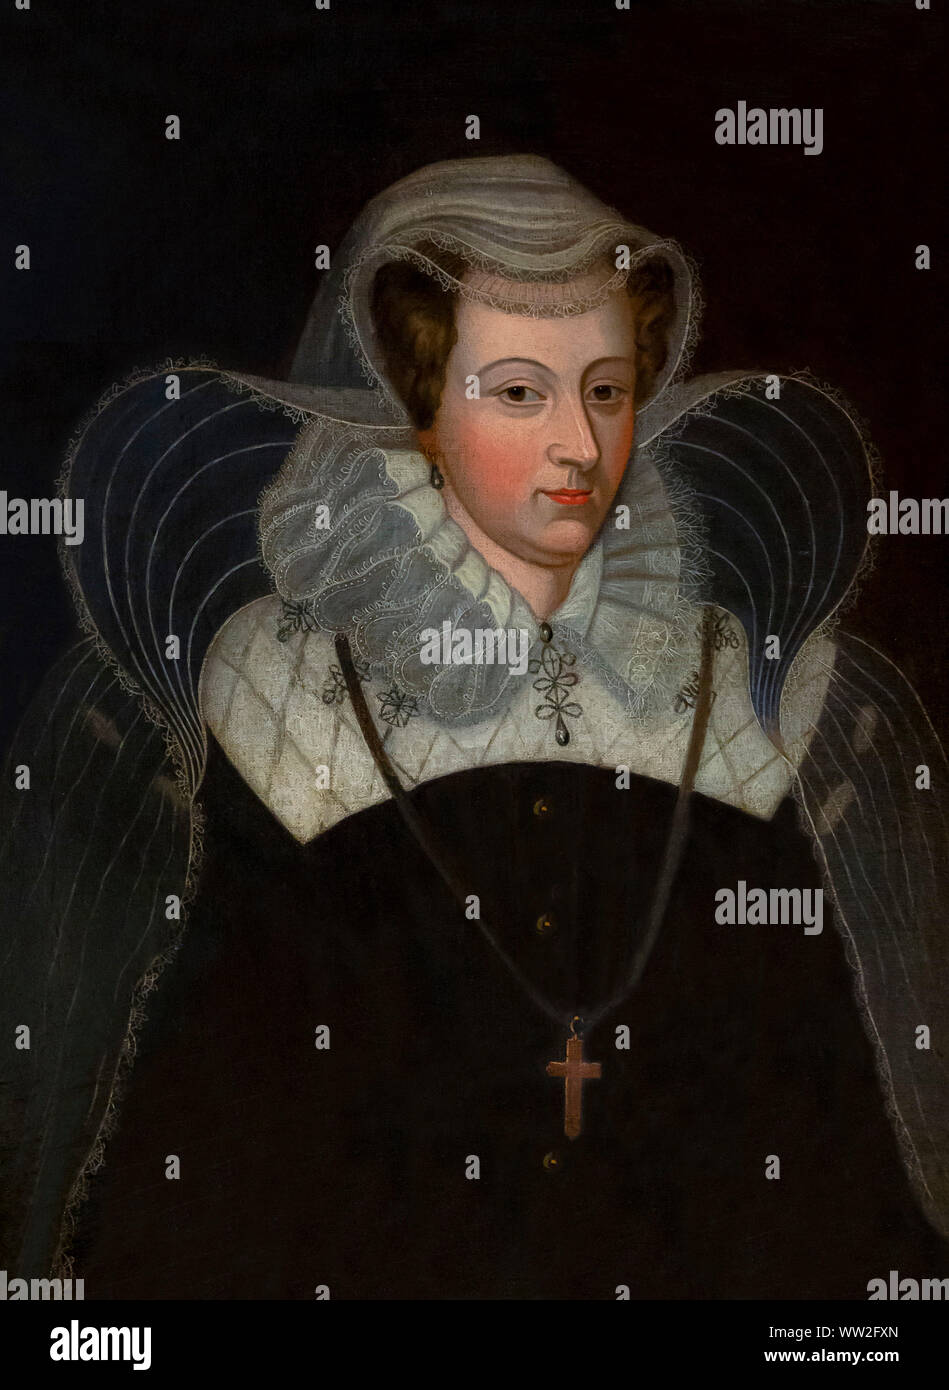 Portrait of Mary Queen of Scots, 18th century, Stock Photo